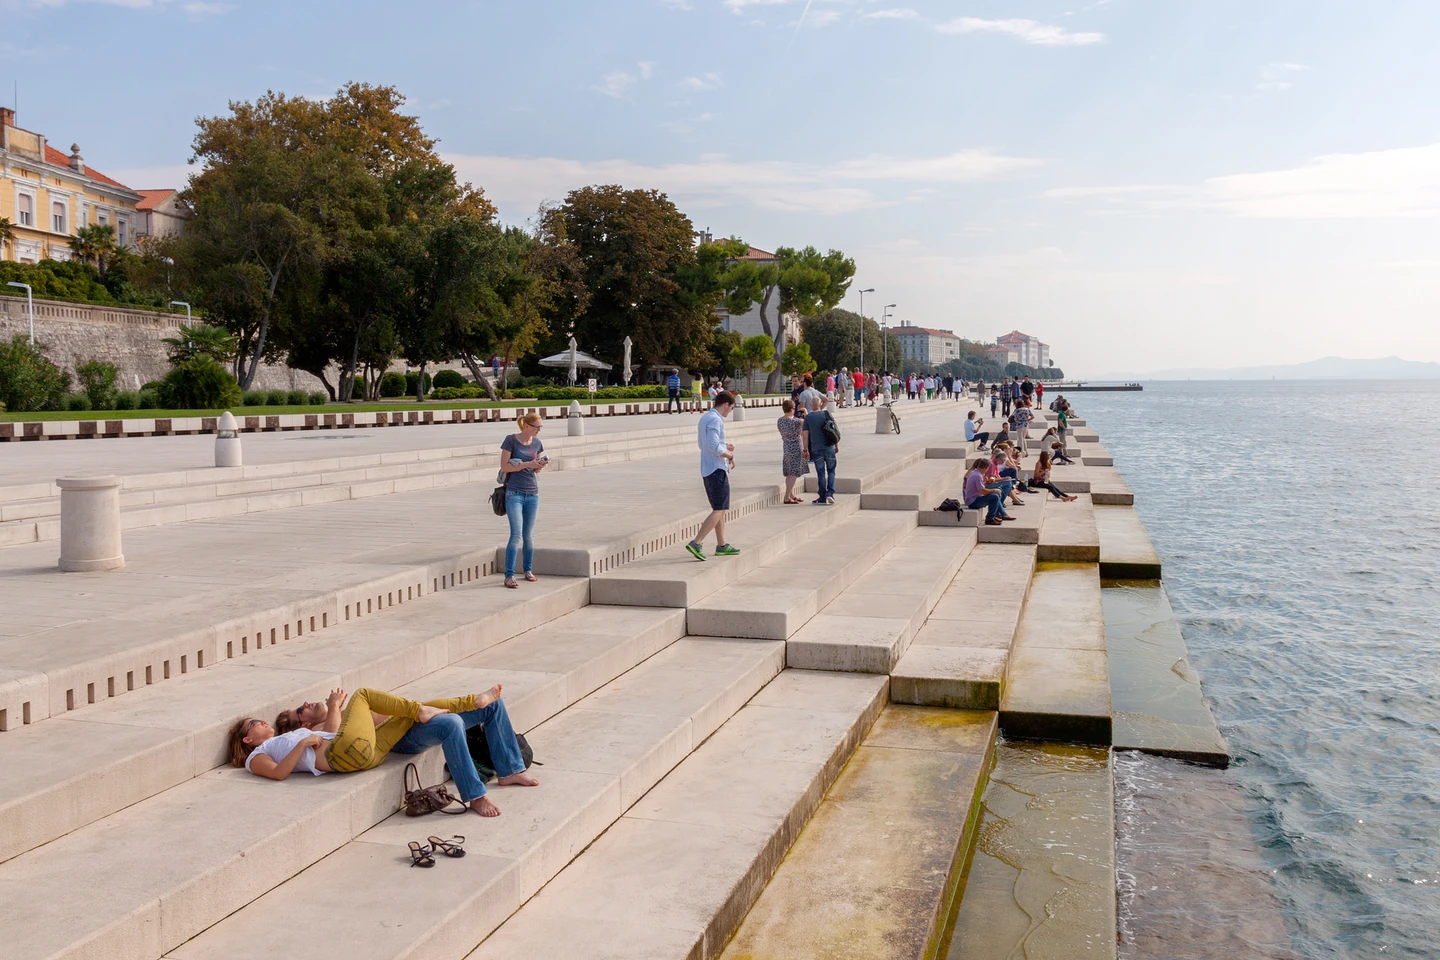 People lying on the steps, enjoying the fresh air and the music of the sea